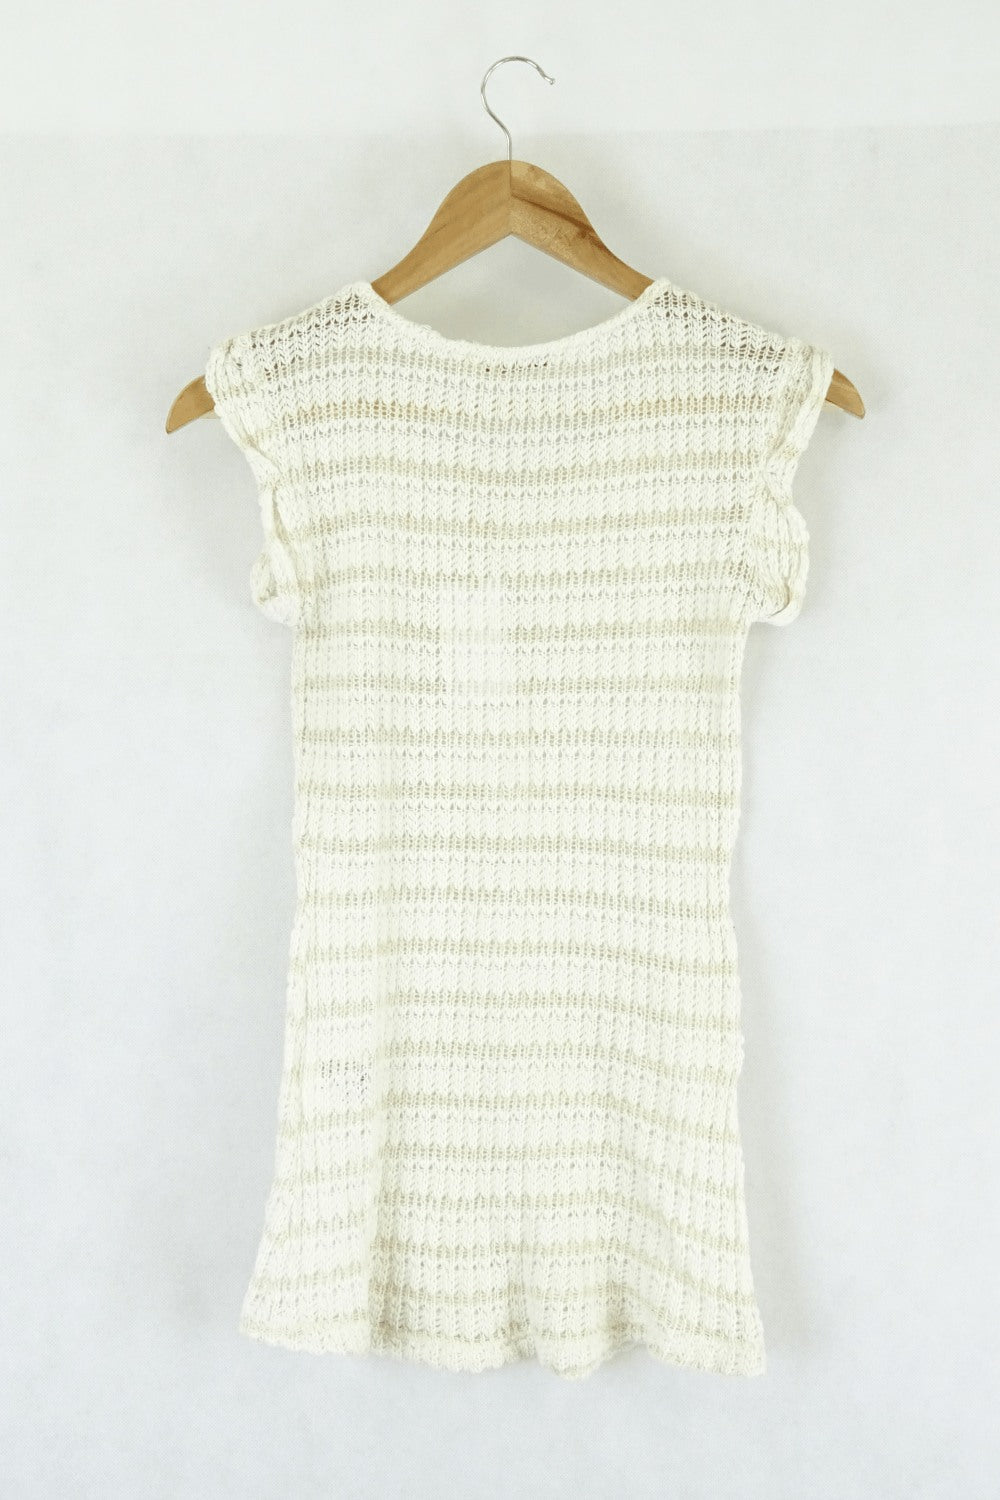 LK &amp; JNS DEW knitted white and gold top S